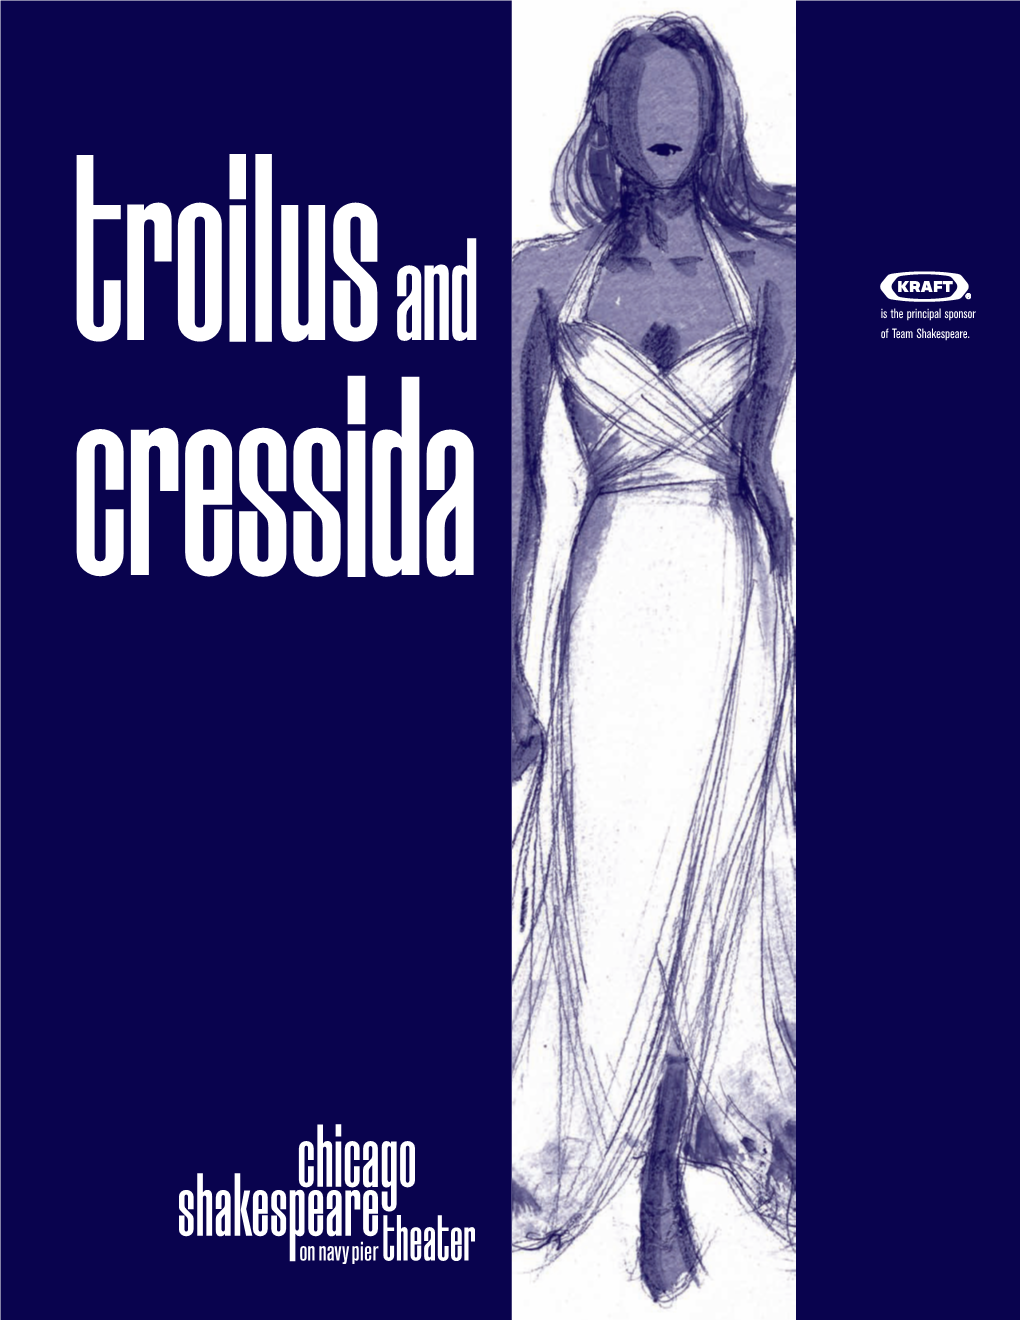 Troilus and Cressida” Resource Center, and a Shakespeare Specialty Bookstall